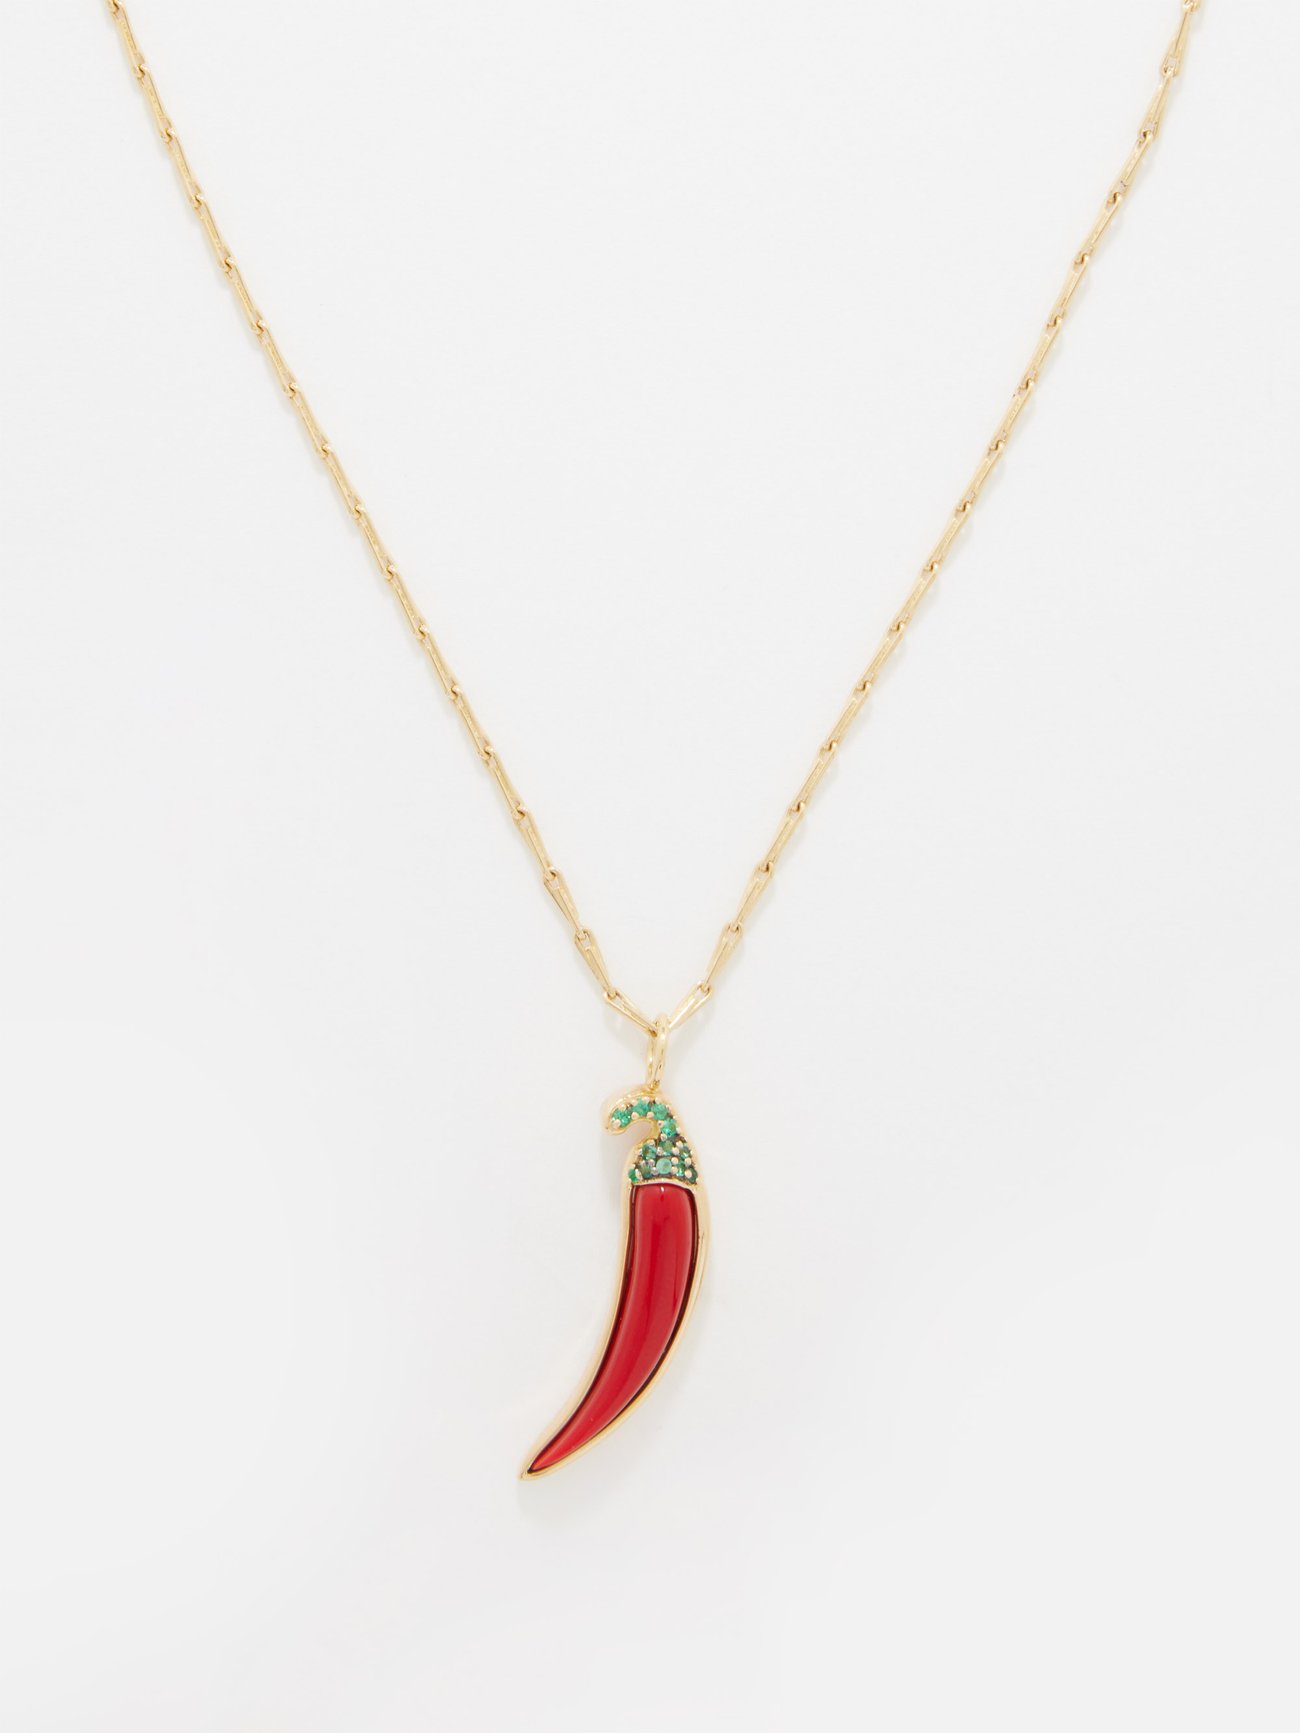 Buy Chili Necklace Online In India - Etsy India